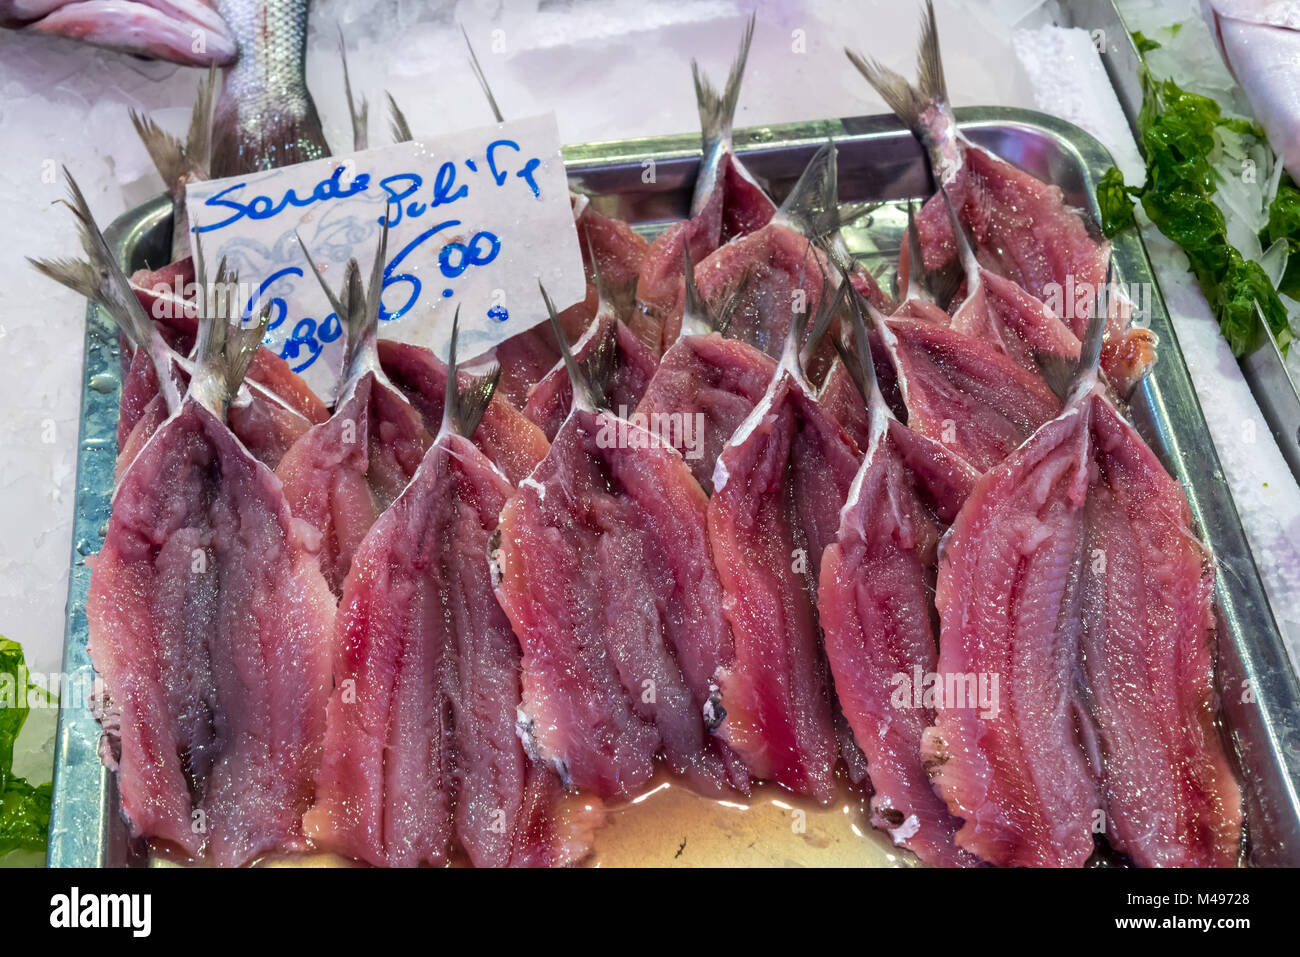 Sardine fillets for sale at a market in Palermo Stock Photo